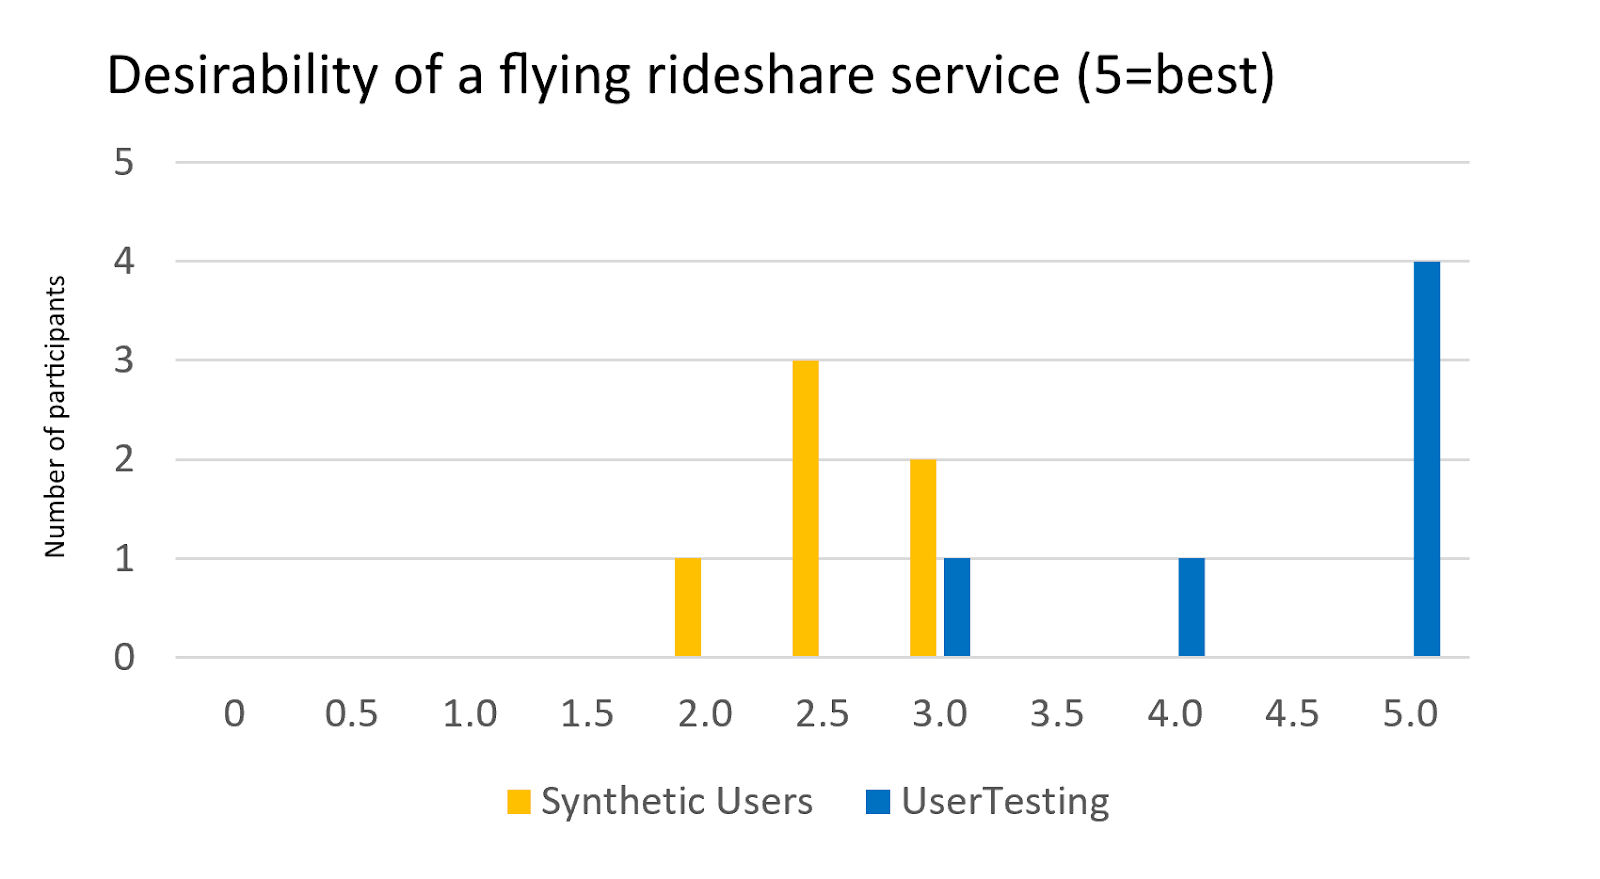 A bar graph showing that Synthetic Users responses clustered around 2.5 and UserTesting scores leaned toward 5.